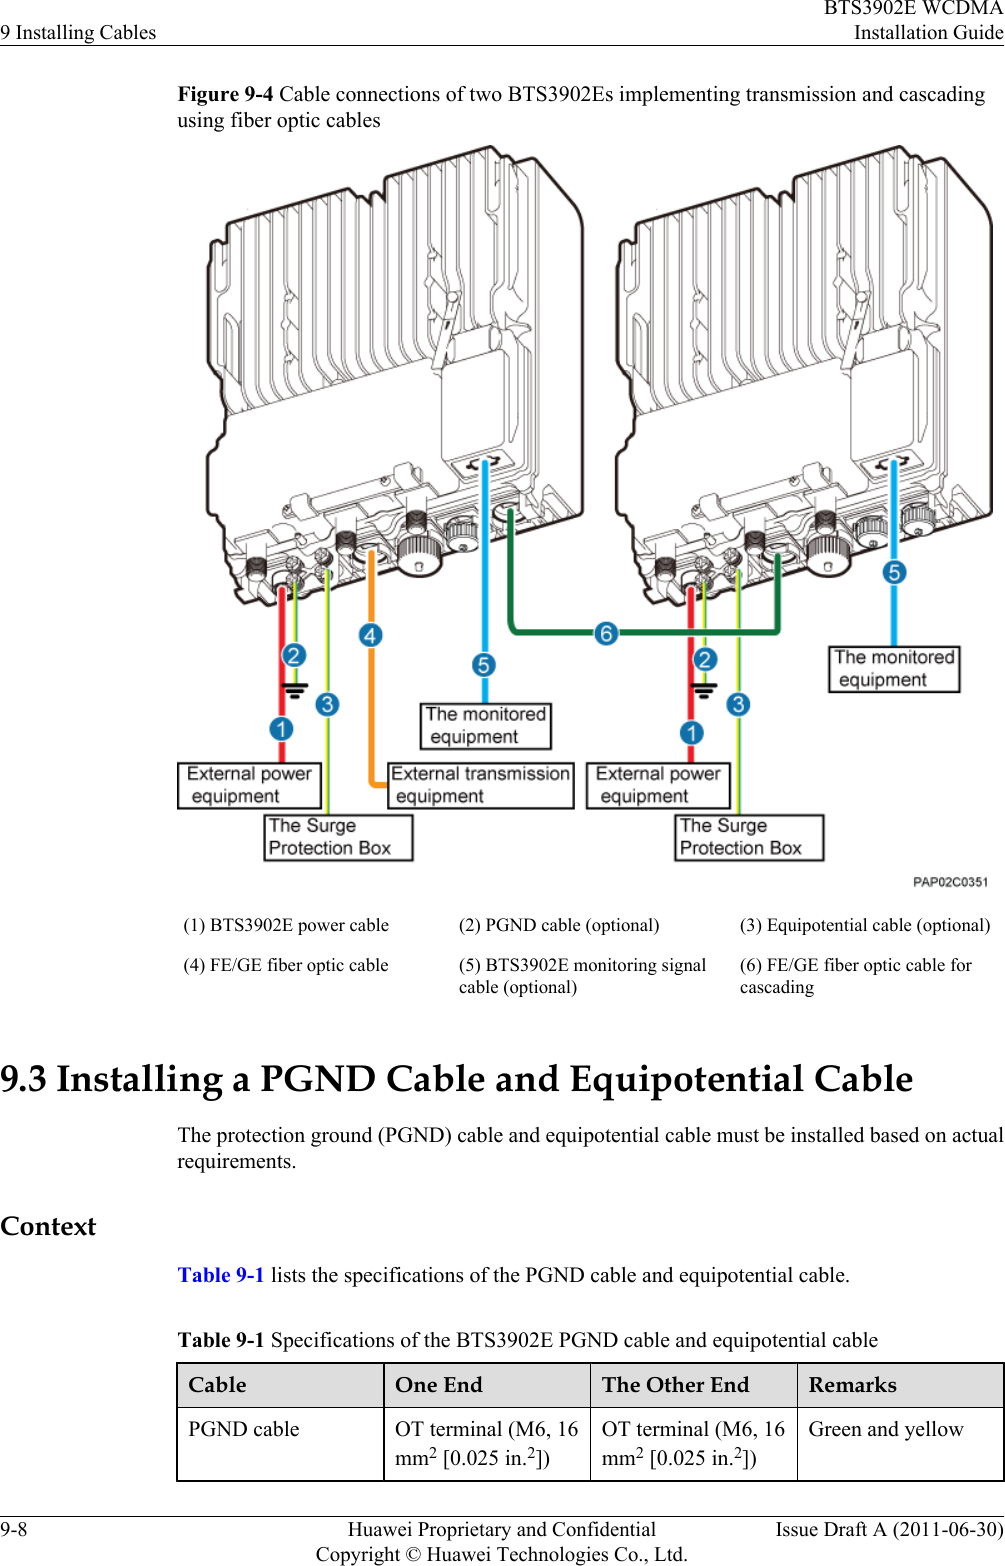 Figure 9-4 Cable connections of two BTS3902Es implementing transmission and cascadingusing fiber optic cables(1) BTS3902E power cable (2) PGND cable (optional) (3) Equipotential cable (optional)(4) FE/GE fiber optic cable (5) BTS3902E monitoring signalcable (optional)(6) FE/GE fiber optic cable forcascading9.3 Installing a PGND Cable and Equipotential CableThe protection ground (PGND) cable and equipotential cable must be installed based on actualrequirements.ContextTable 9-1 lists the specifications of the PGND cable and equipotential cable.Table 9-1 Specifications of the BTS3902E PGND cable and equipotential cableCable One End The Other End RemarksPGND cable OT terminal (M6, 16mm2 [0.025 in.2])OT terminal (M6, 16mm2 [0.025 in.2])Green and yellow9 Installing CablesBTS3902E WCDMAInstallation Guide9-8 Huawei Proprietary and ConfidentialCopyright © Huawei Technologies Co., Ltd.Issue Draft A (2011-06-30)